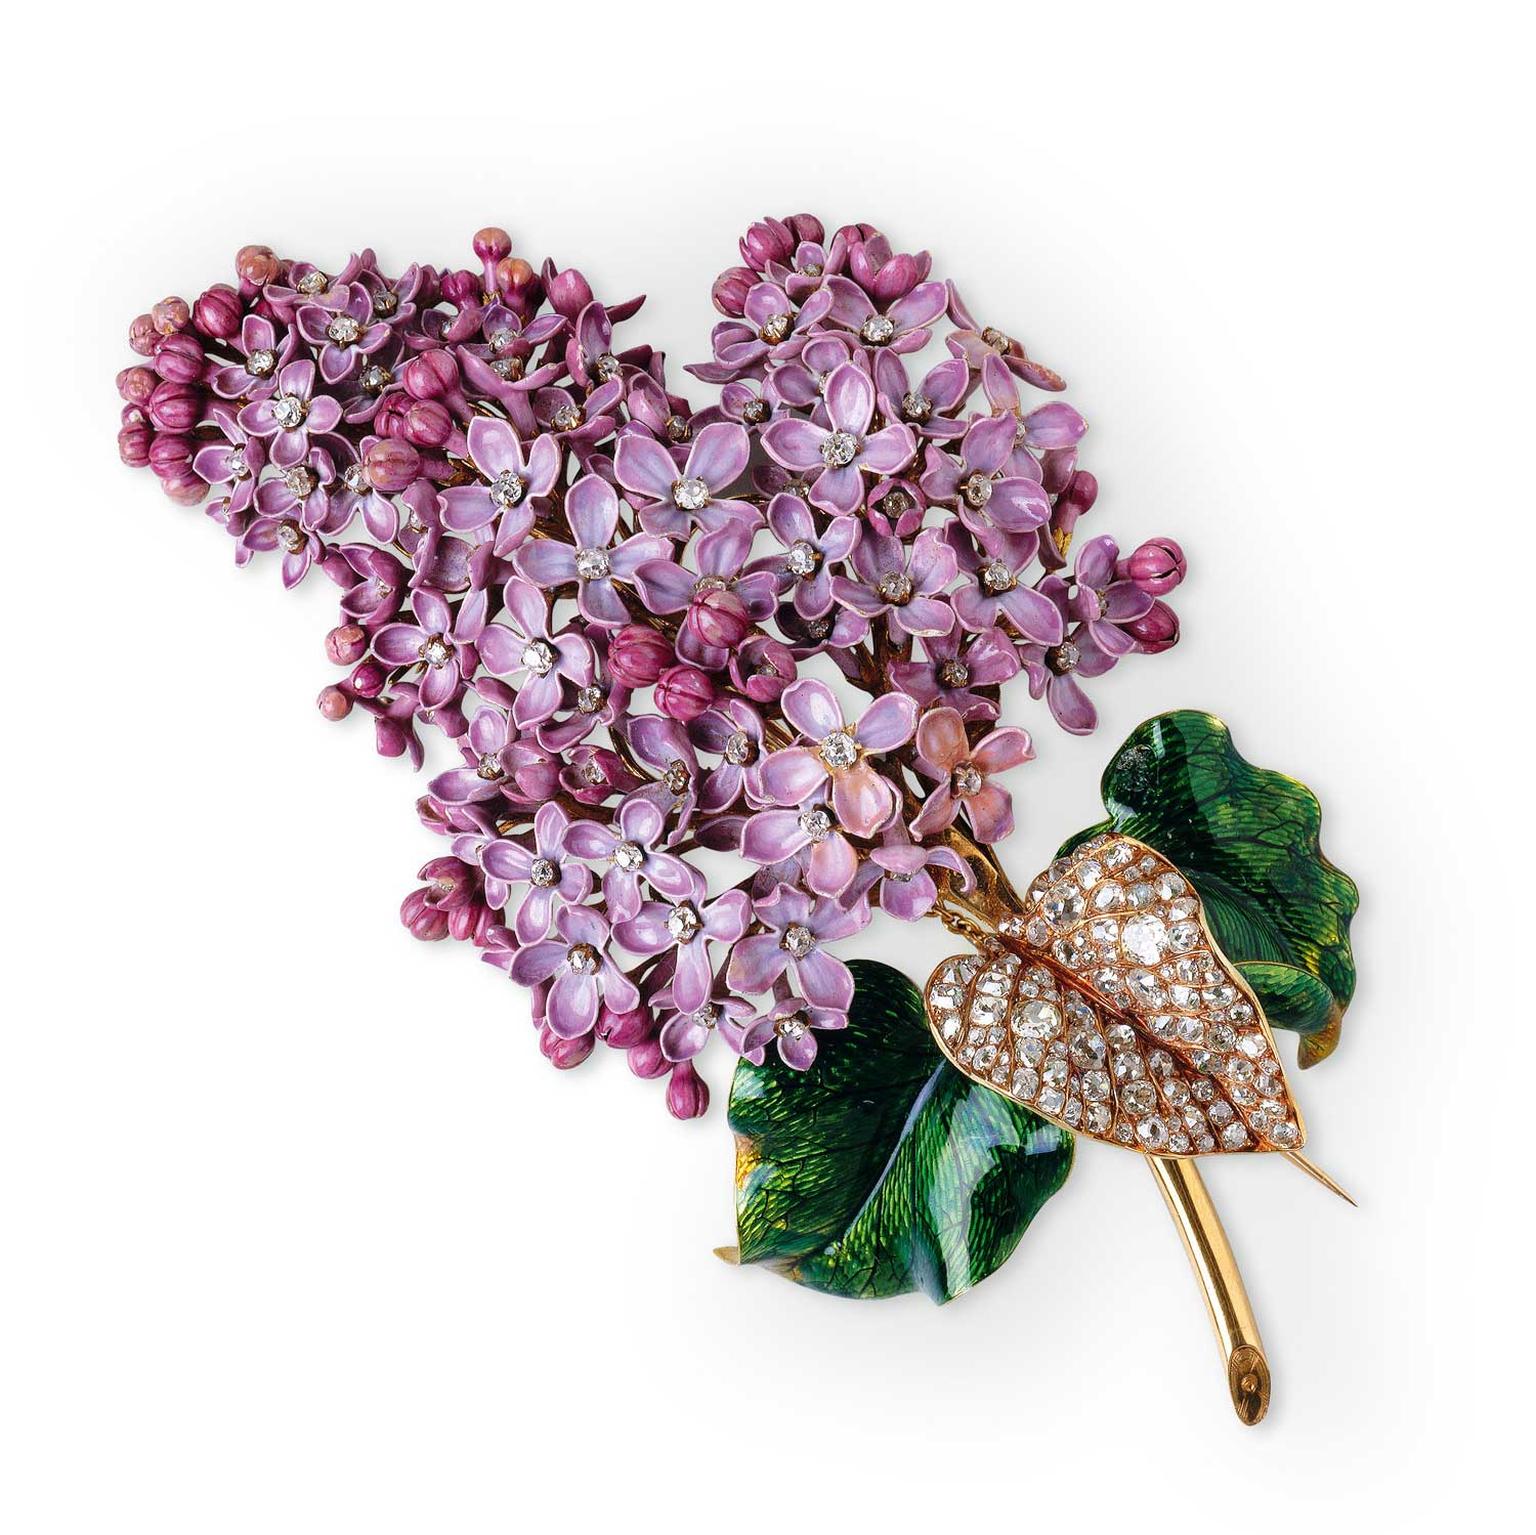 Mellerio dits Meller naturalistic lilac brooch dating from 1862